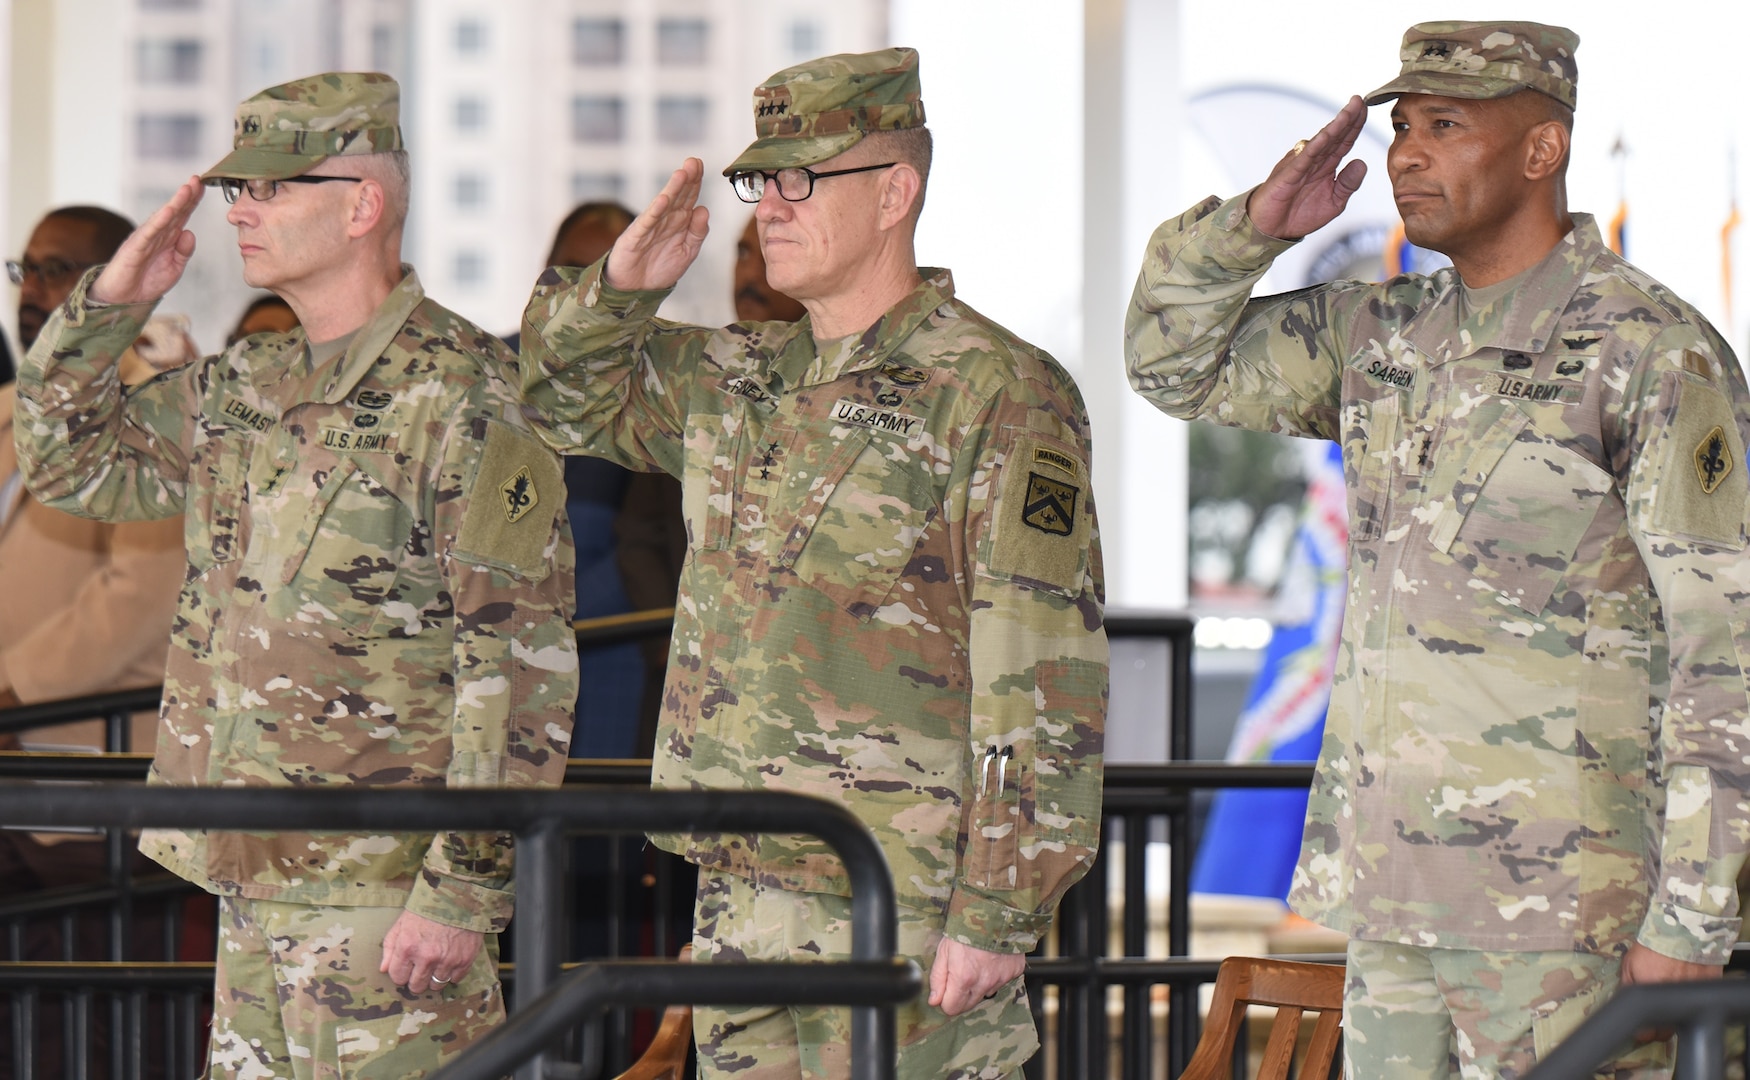 (From left) Maj. Gen. Dennis P. LeMaster, Lt. Gen. James E. Rainey and Maj. Gen. Patrick D. Sargent salute the national colors during the playing of the national anthem during the U.S. Army Medical Center of Excellence change of command ceremony at Joint Base San Antonio-Fort Sam Houston Jan. 10.